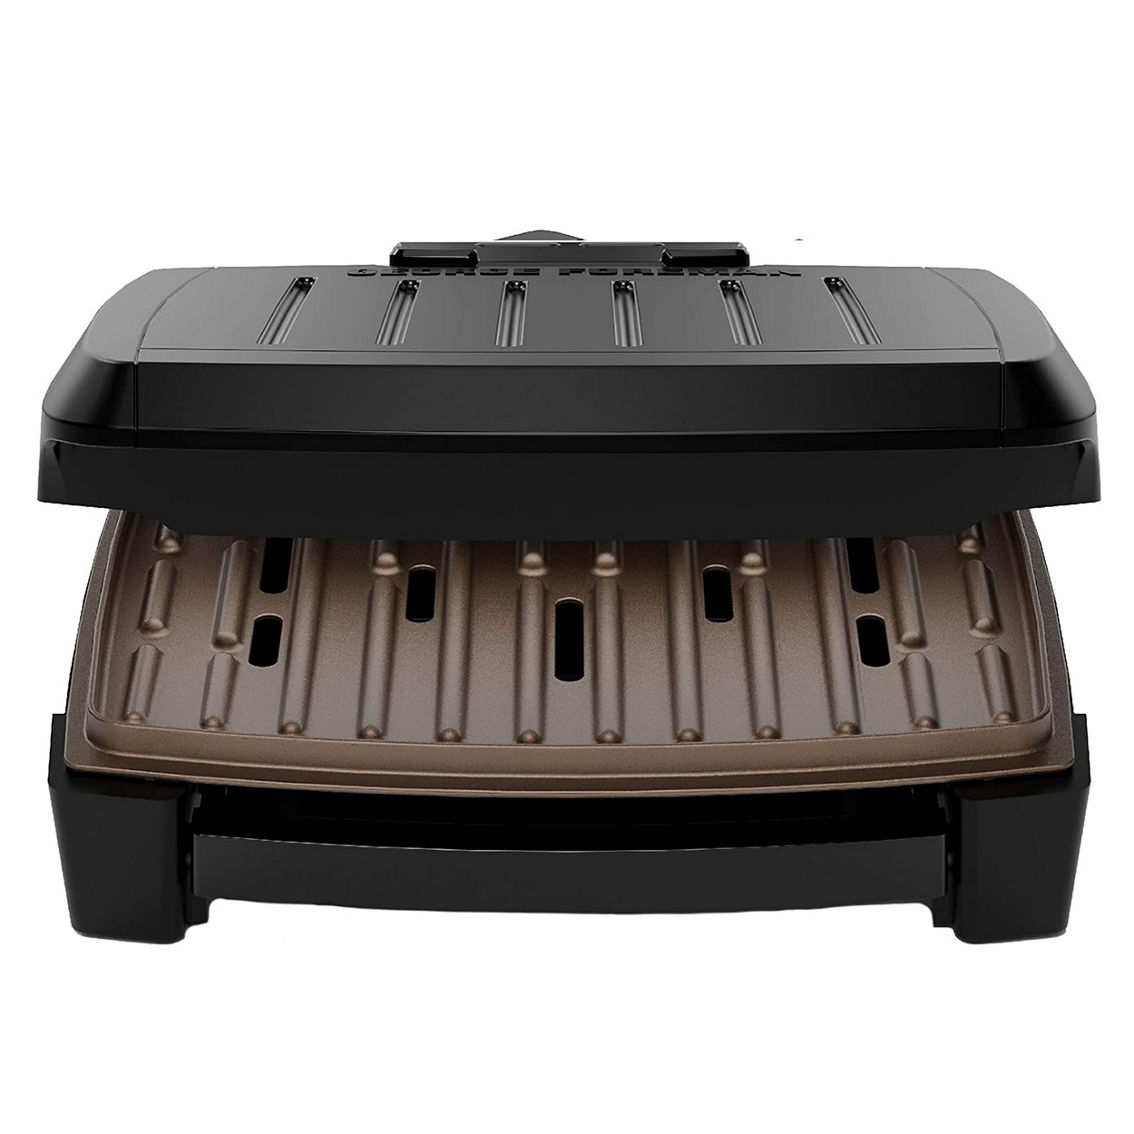 George Foreman 4 Serving Submersible Grill - Bronze Plates - Image 2 of 4